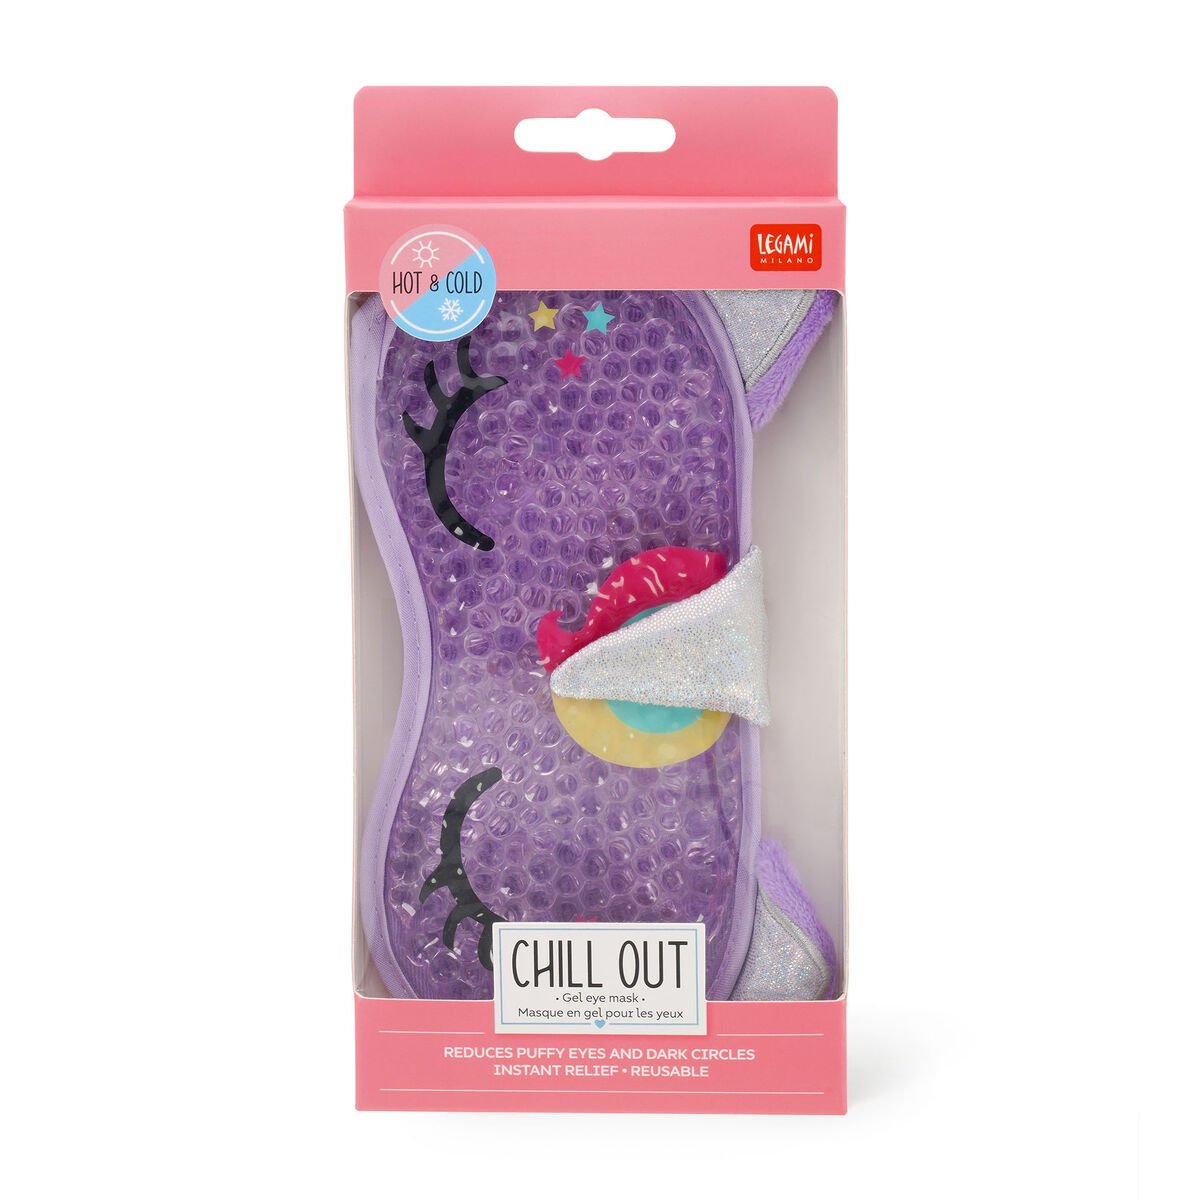 Masque Gel Pour les Yeux - Chill Out, , zoo